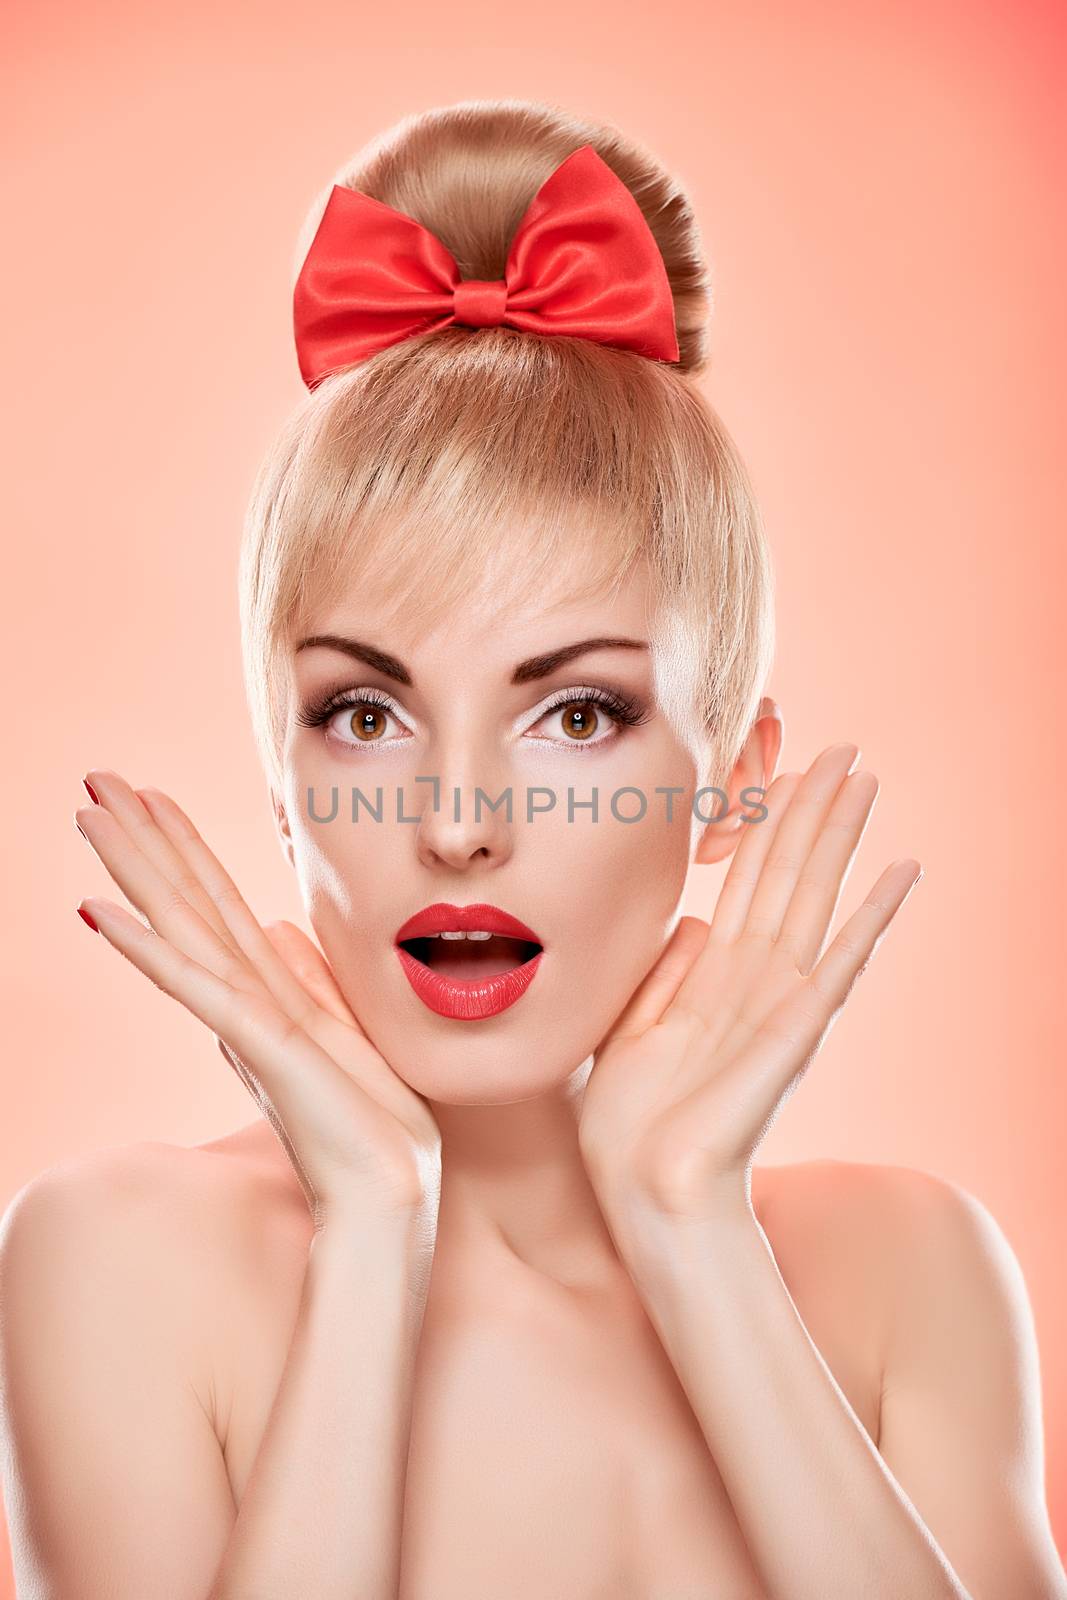 Beauty fashion portrait happy woman surprised looks. Sensual attractive pretty nude blonde sexy girl, Pinup hairstyle, red bow. Unusual emotional playful. Romantic, retro vintage, skincare on pink